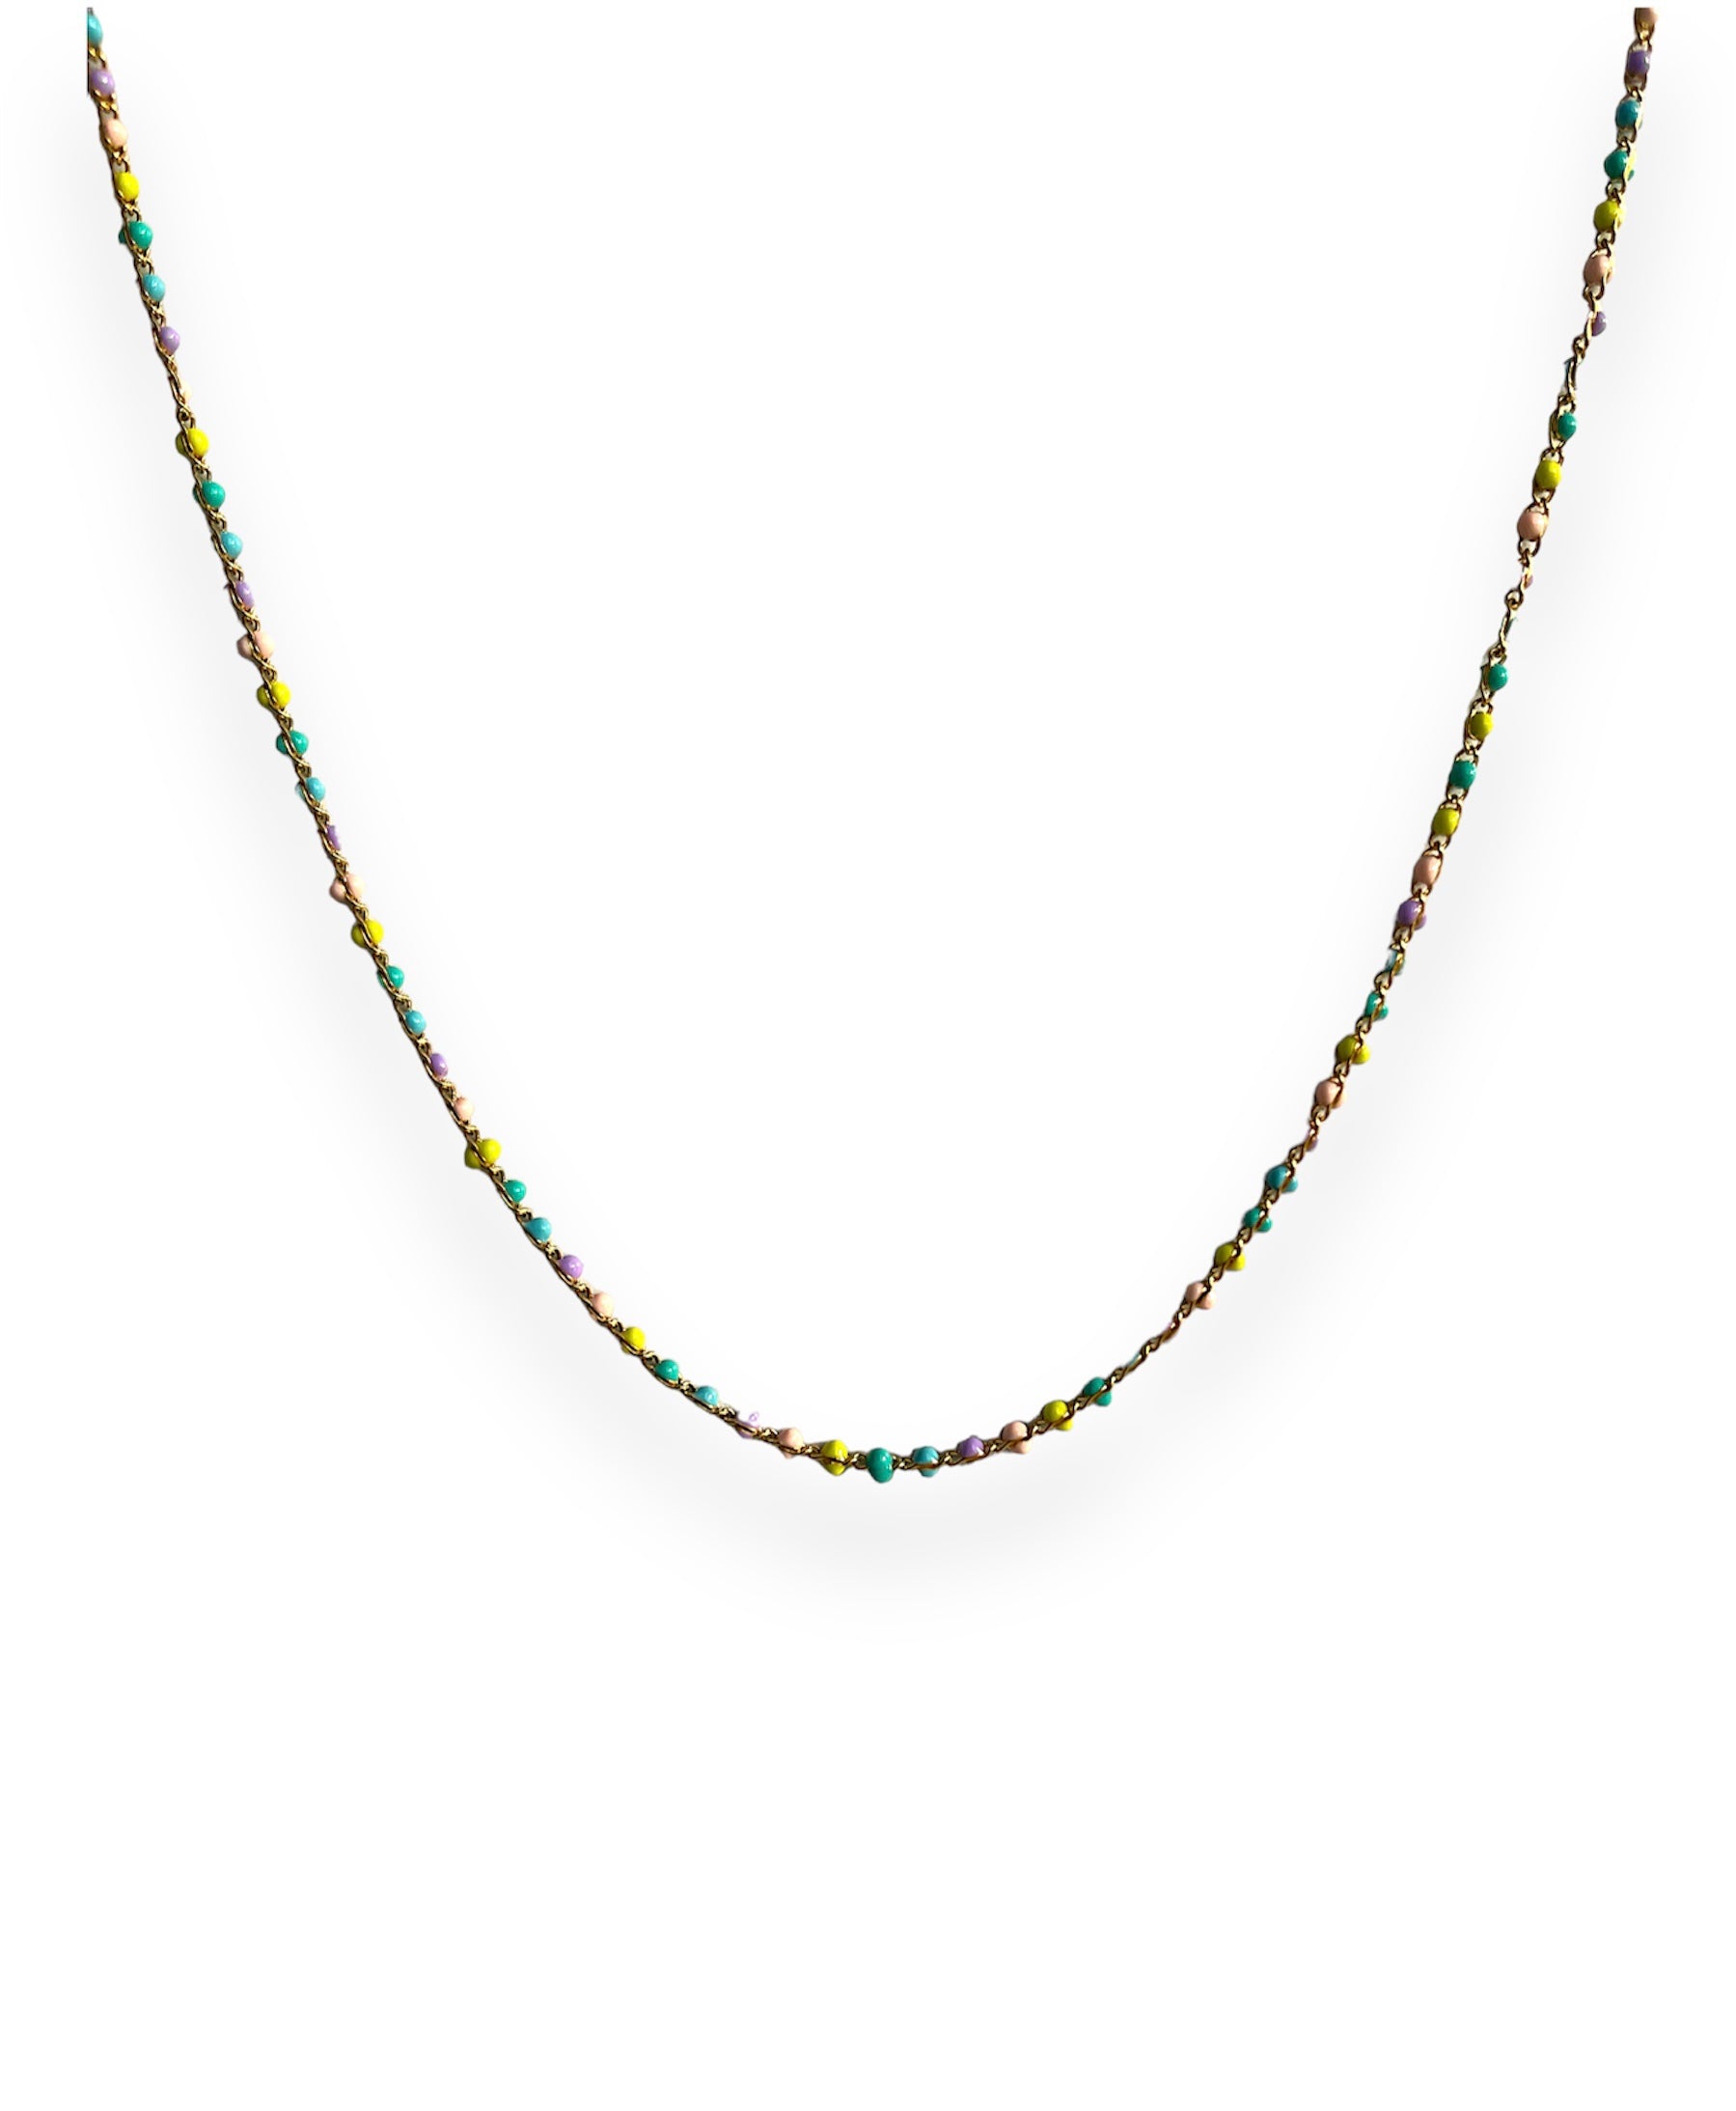 Enamel Beaded Chain Necklace Turquoise / Gold